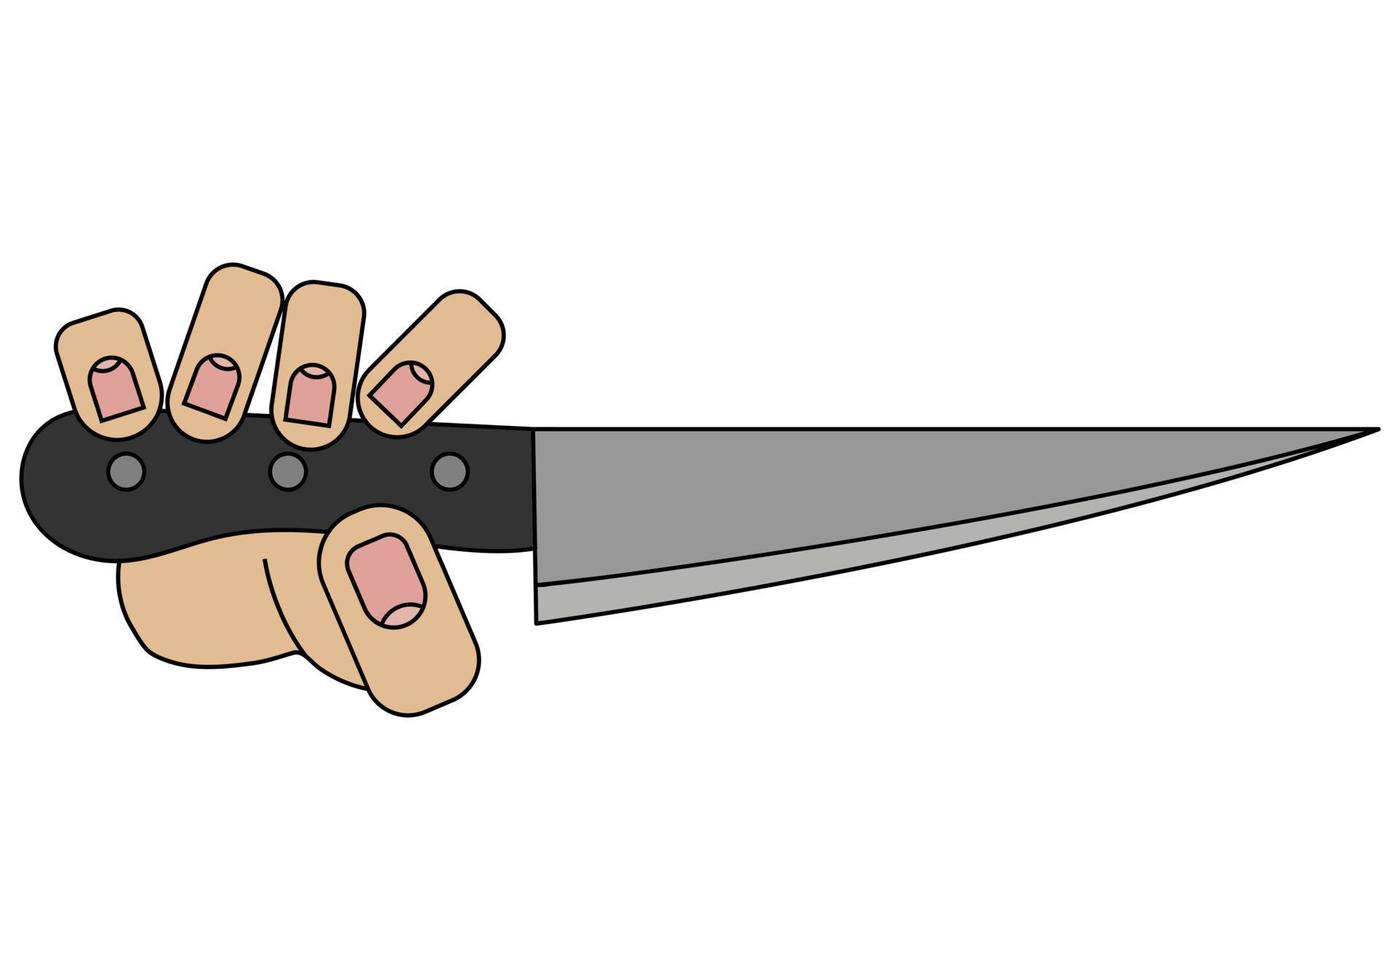 Hand holding a knife, isolated on white background in cartoon style in vector graphic